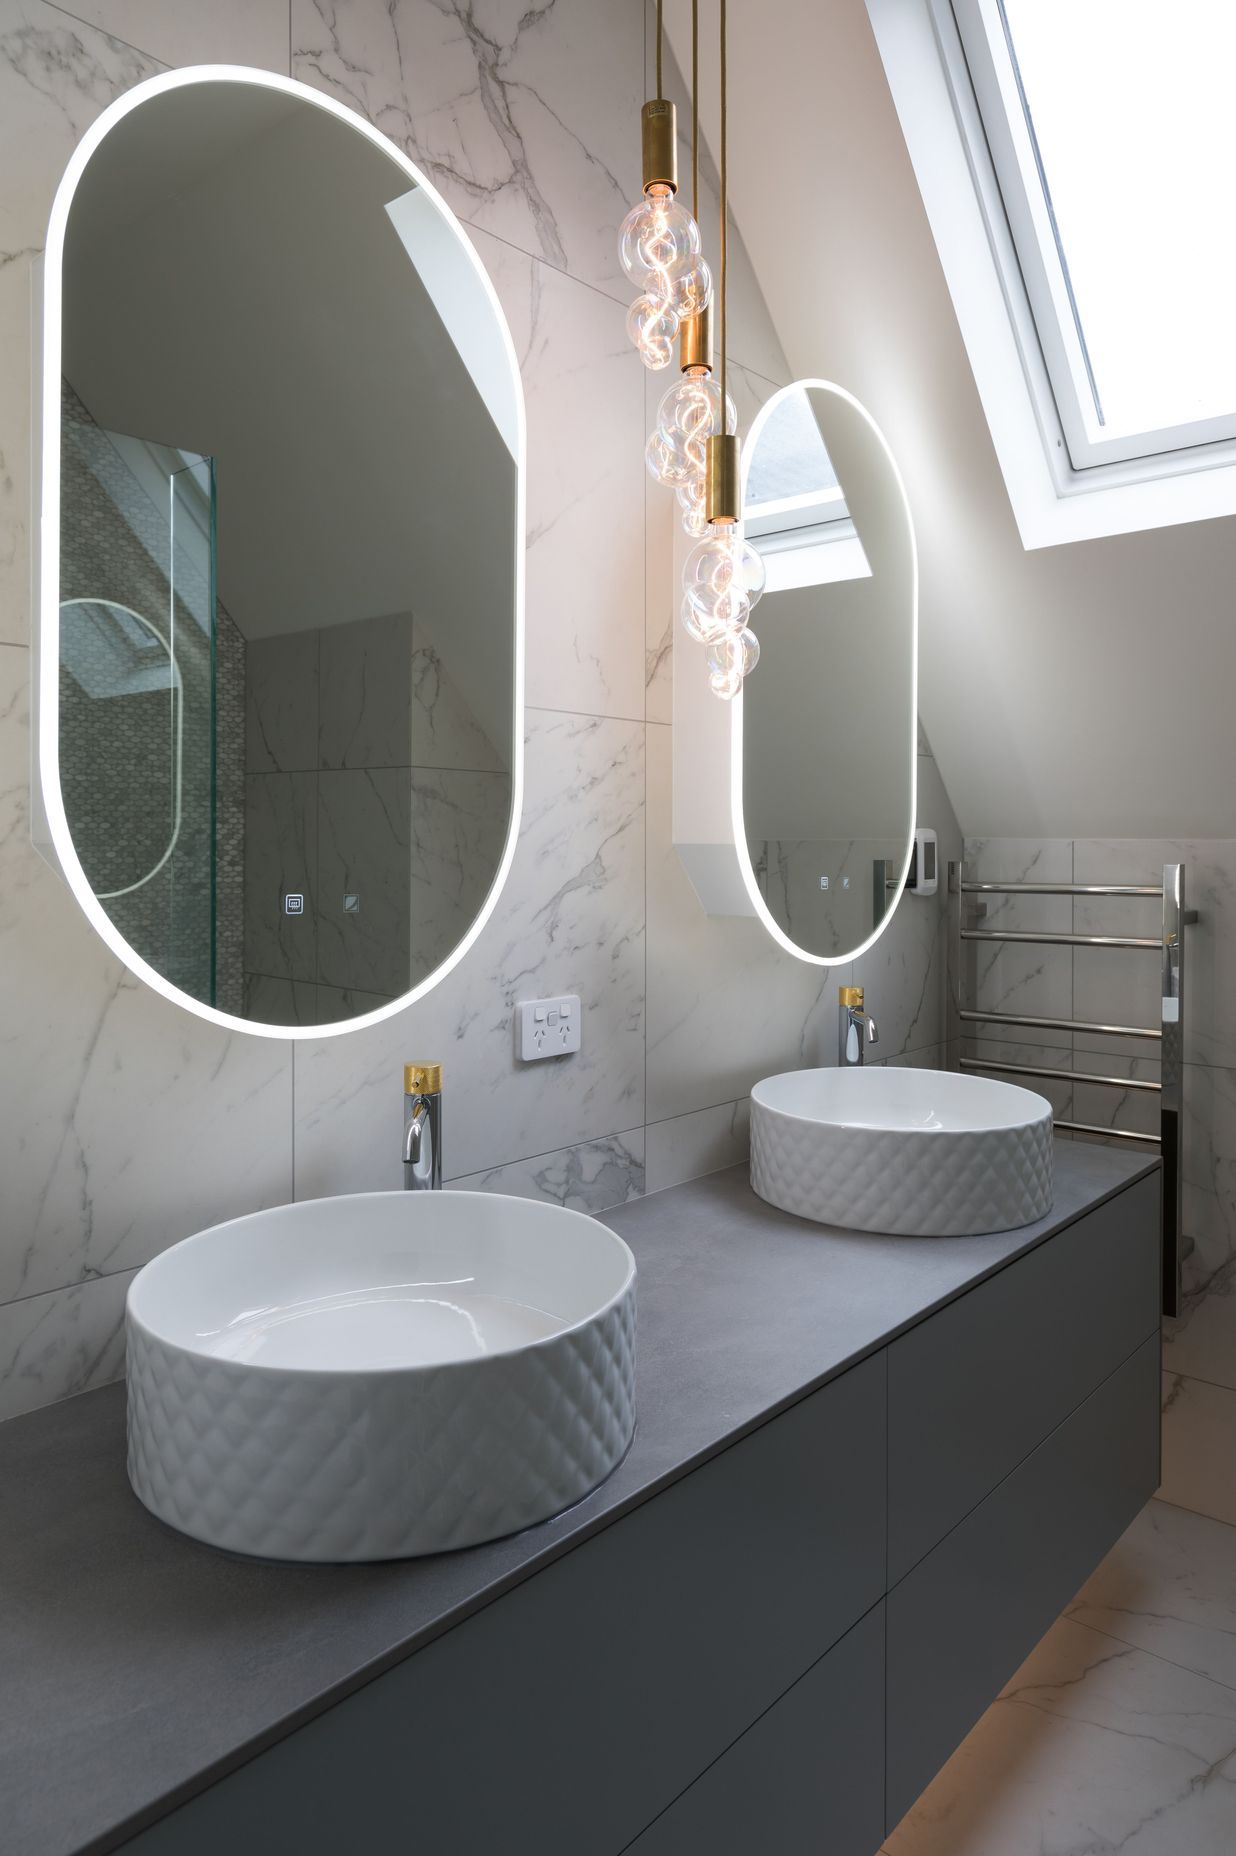 Ensuite Bathroom - LED mirror cabinets, warm or cool light and demister options